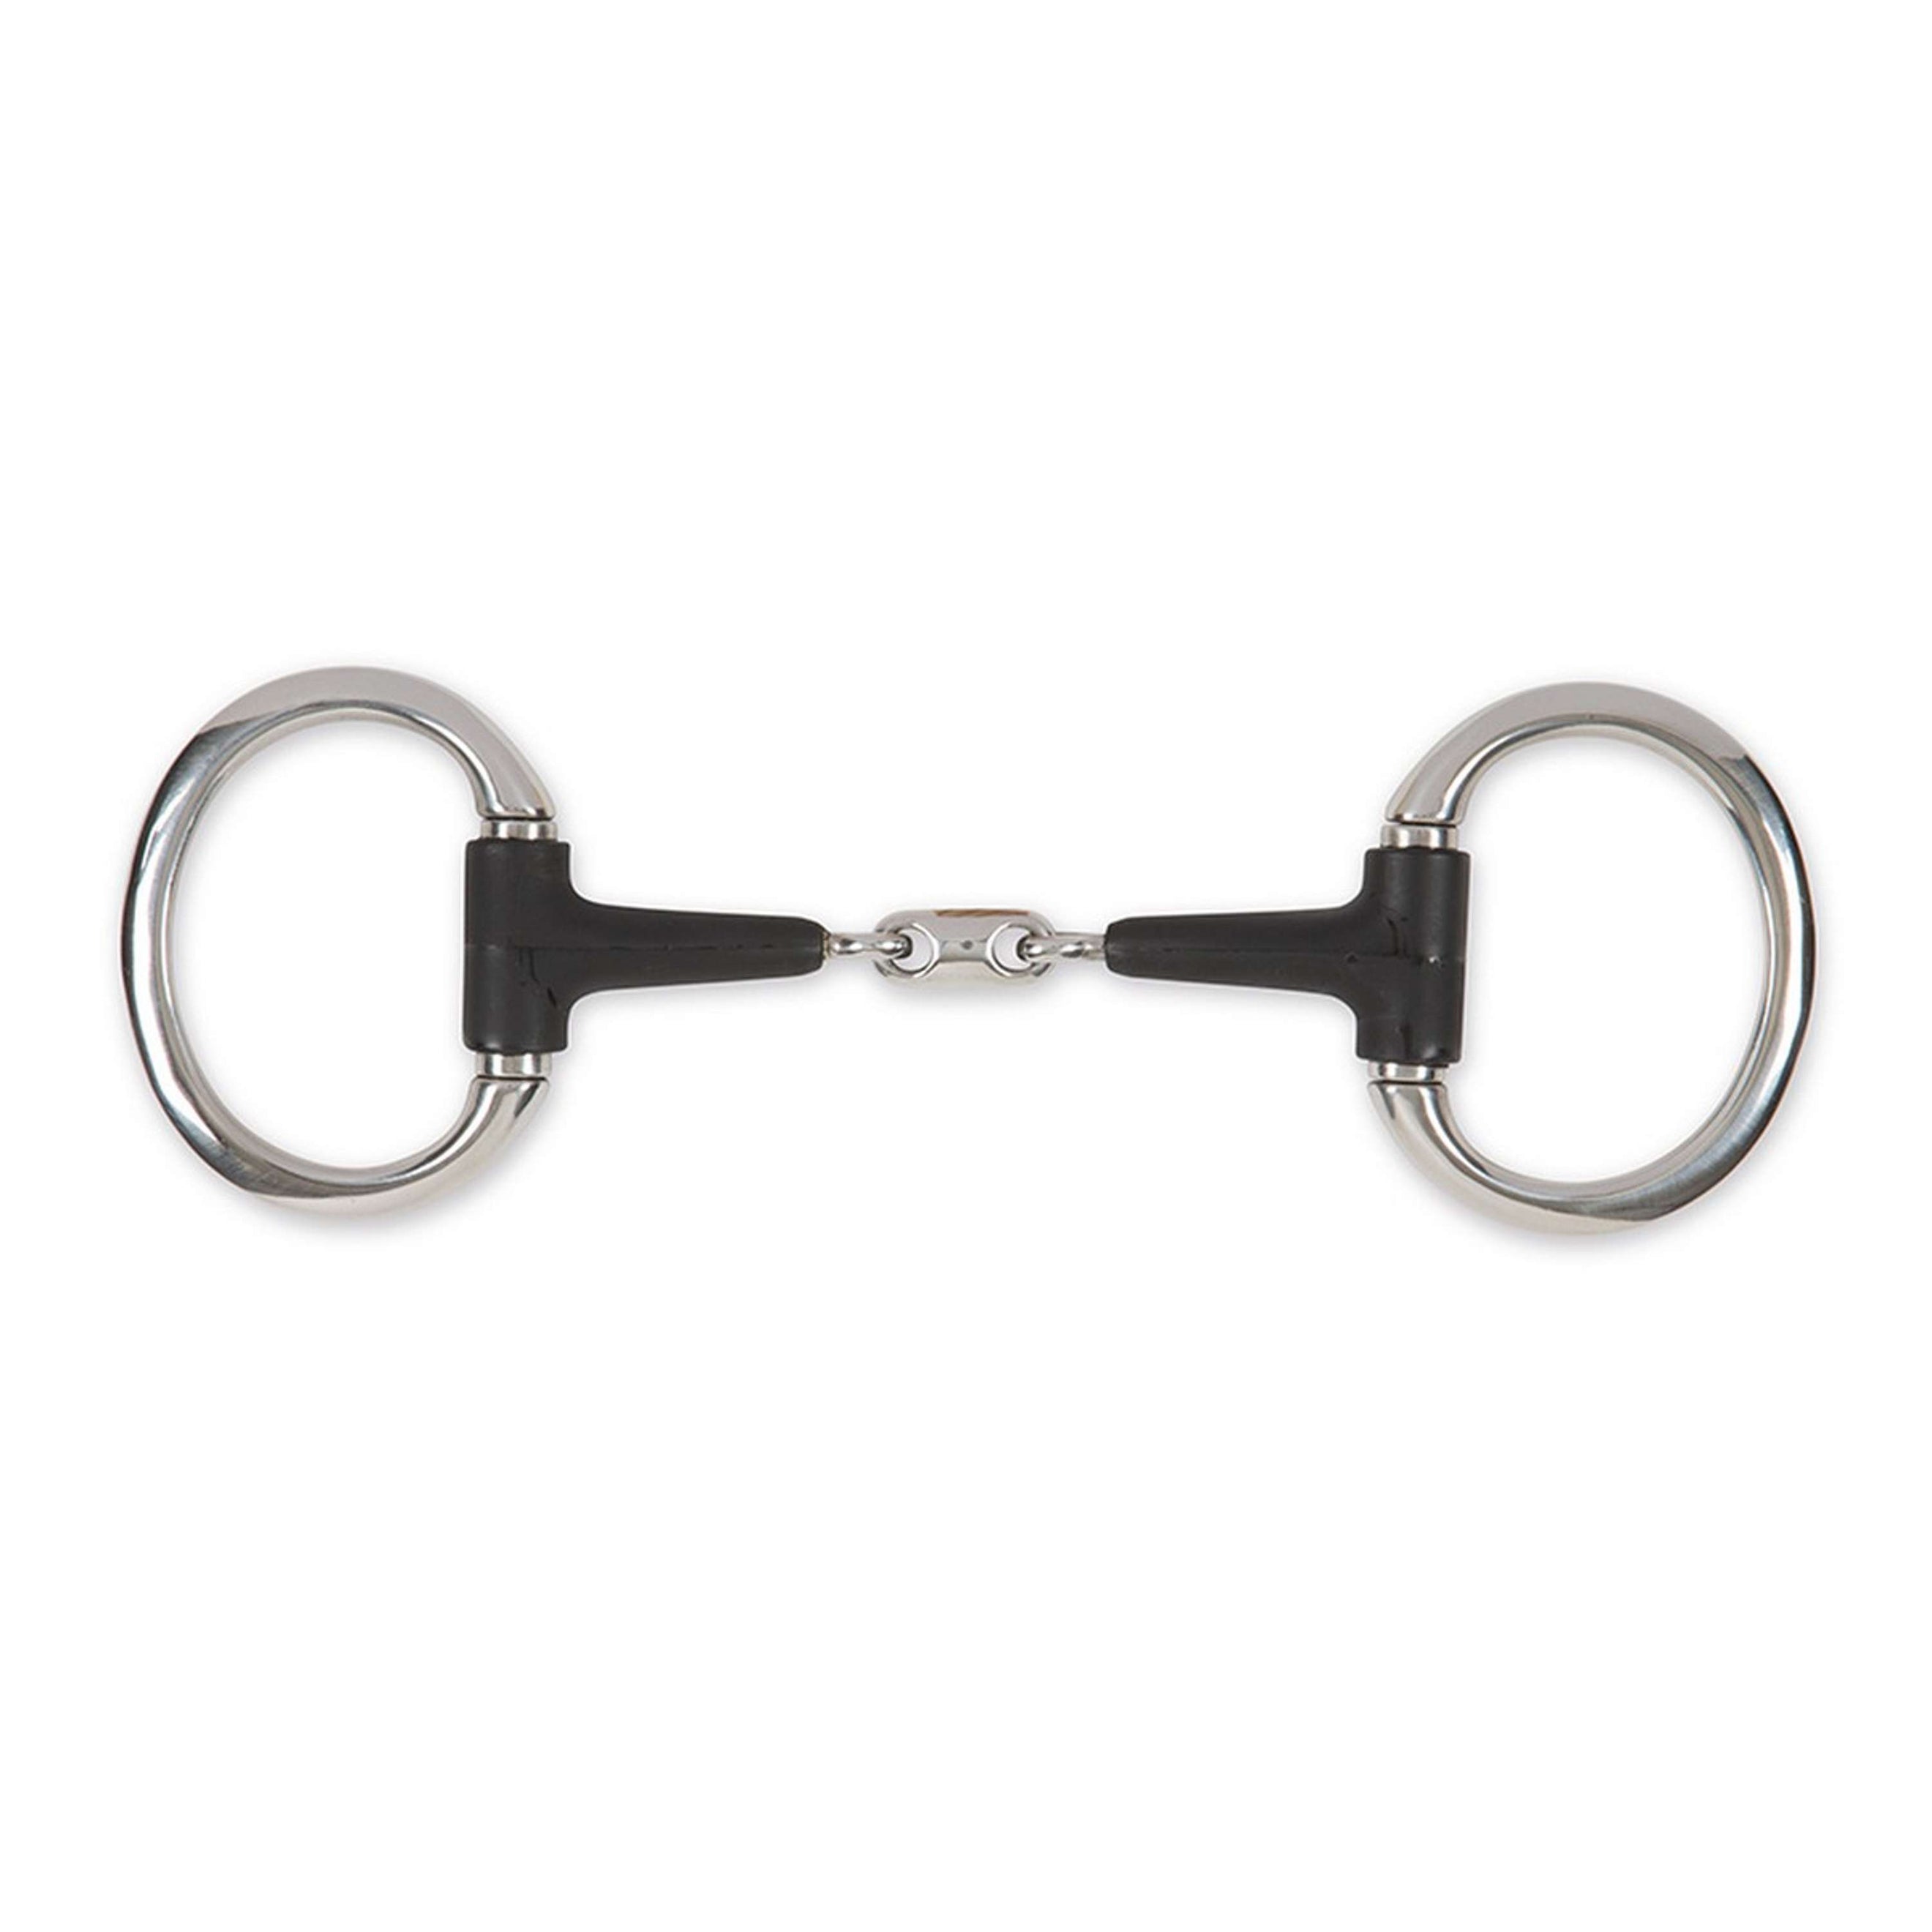 Equirubber by Shires Mors à Olive 15mm Double Brisure